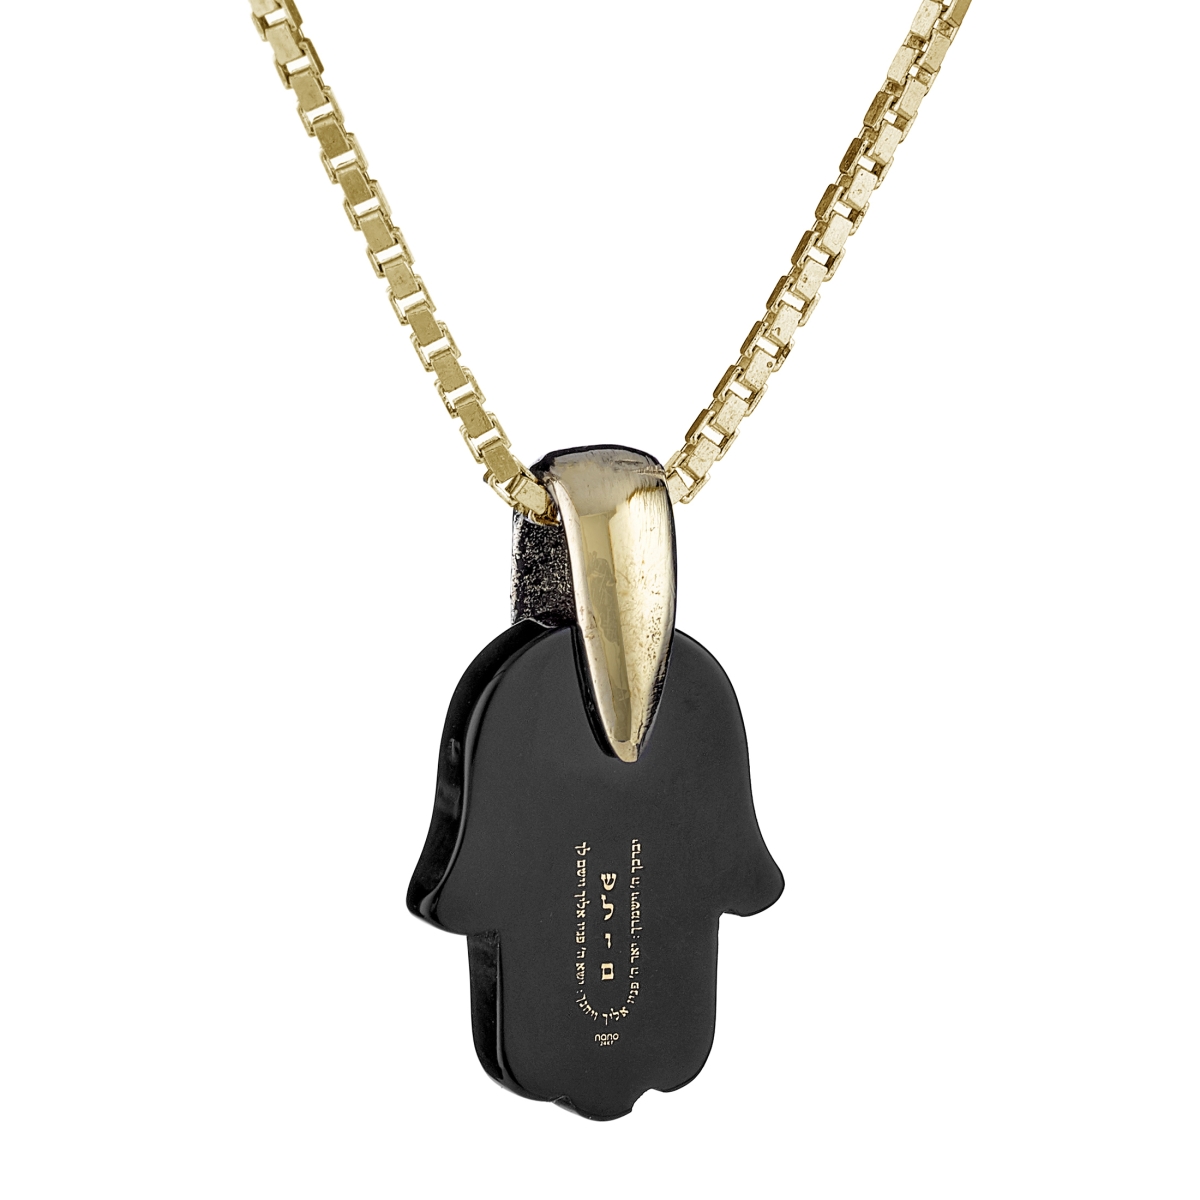 14K Yellow Gold and Black Onyx Nano-Inscribed Hamsa Pendant – Priestly Blessing - Numbers 6:24-26 - 1